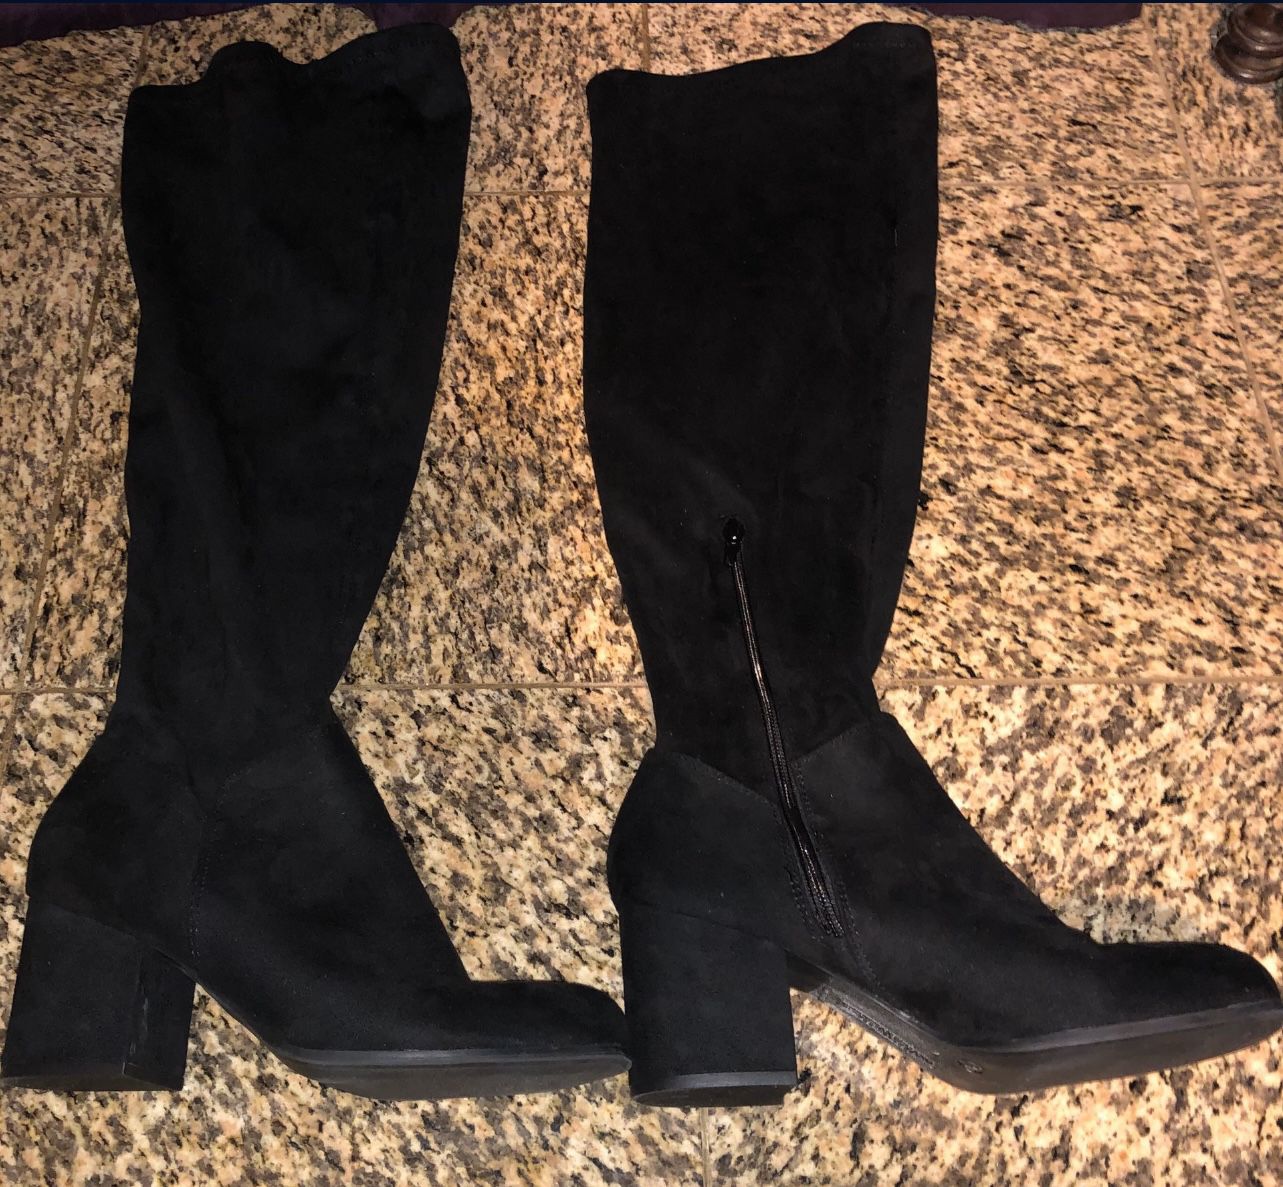 Christian Siriano over the knee size women's boots 8 1/2 W like new